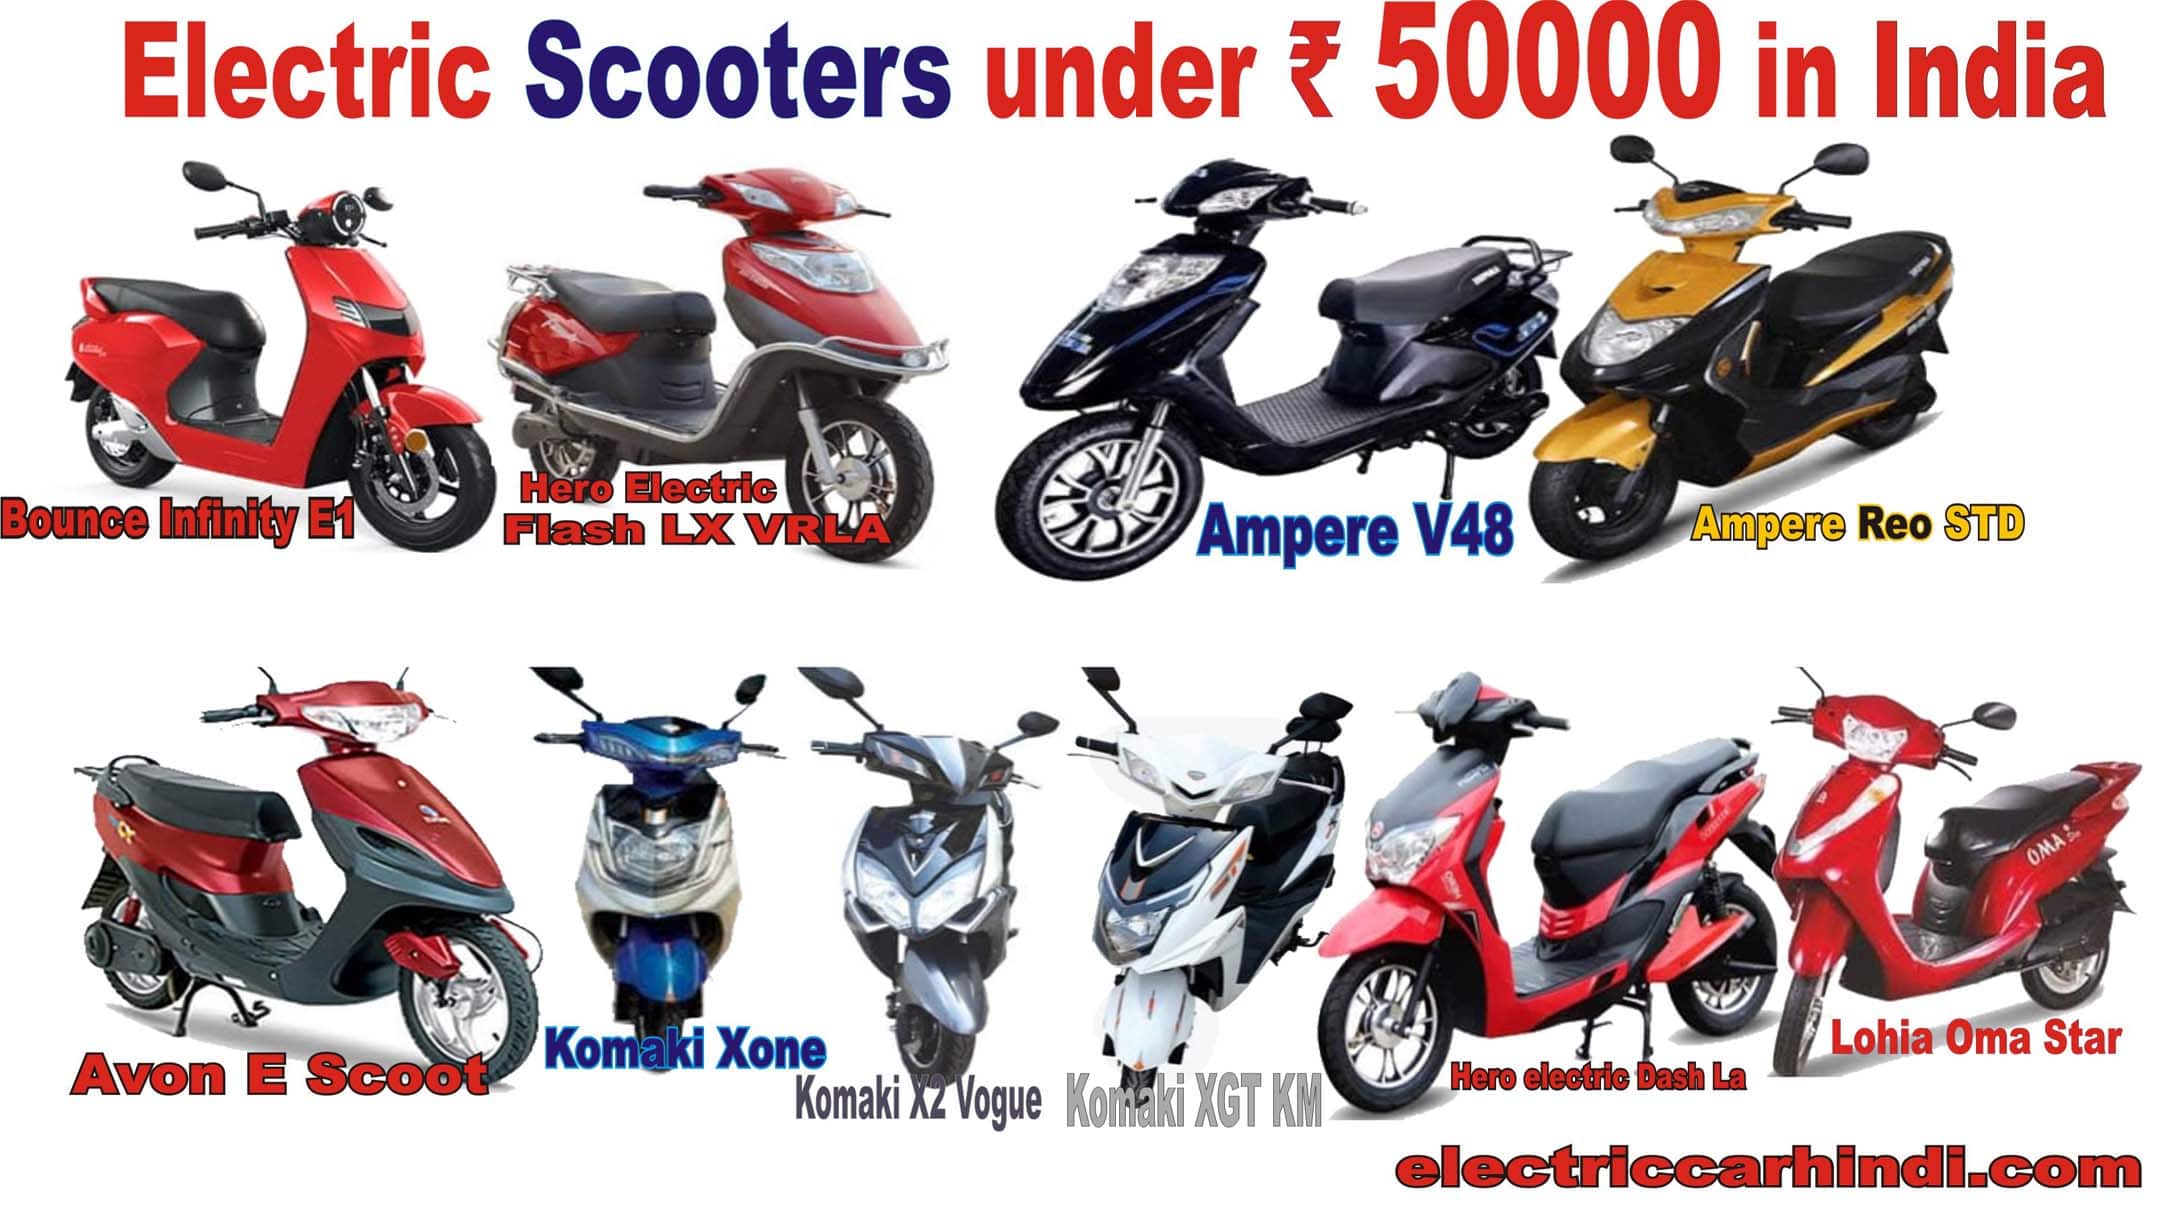 Electric scooters under 50000 in India